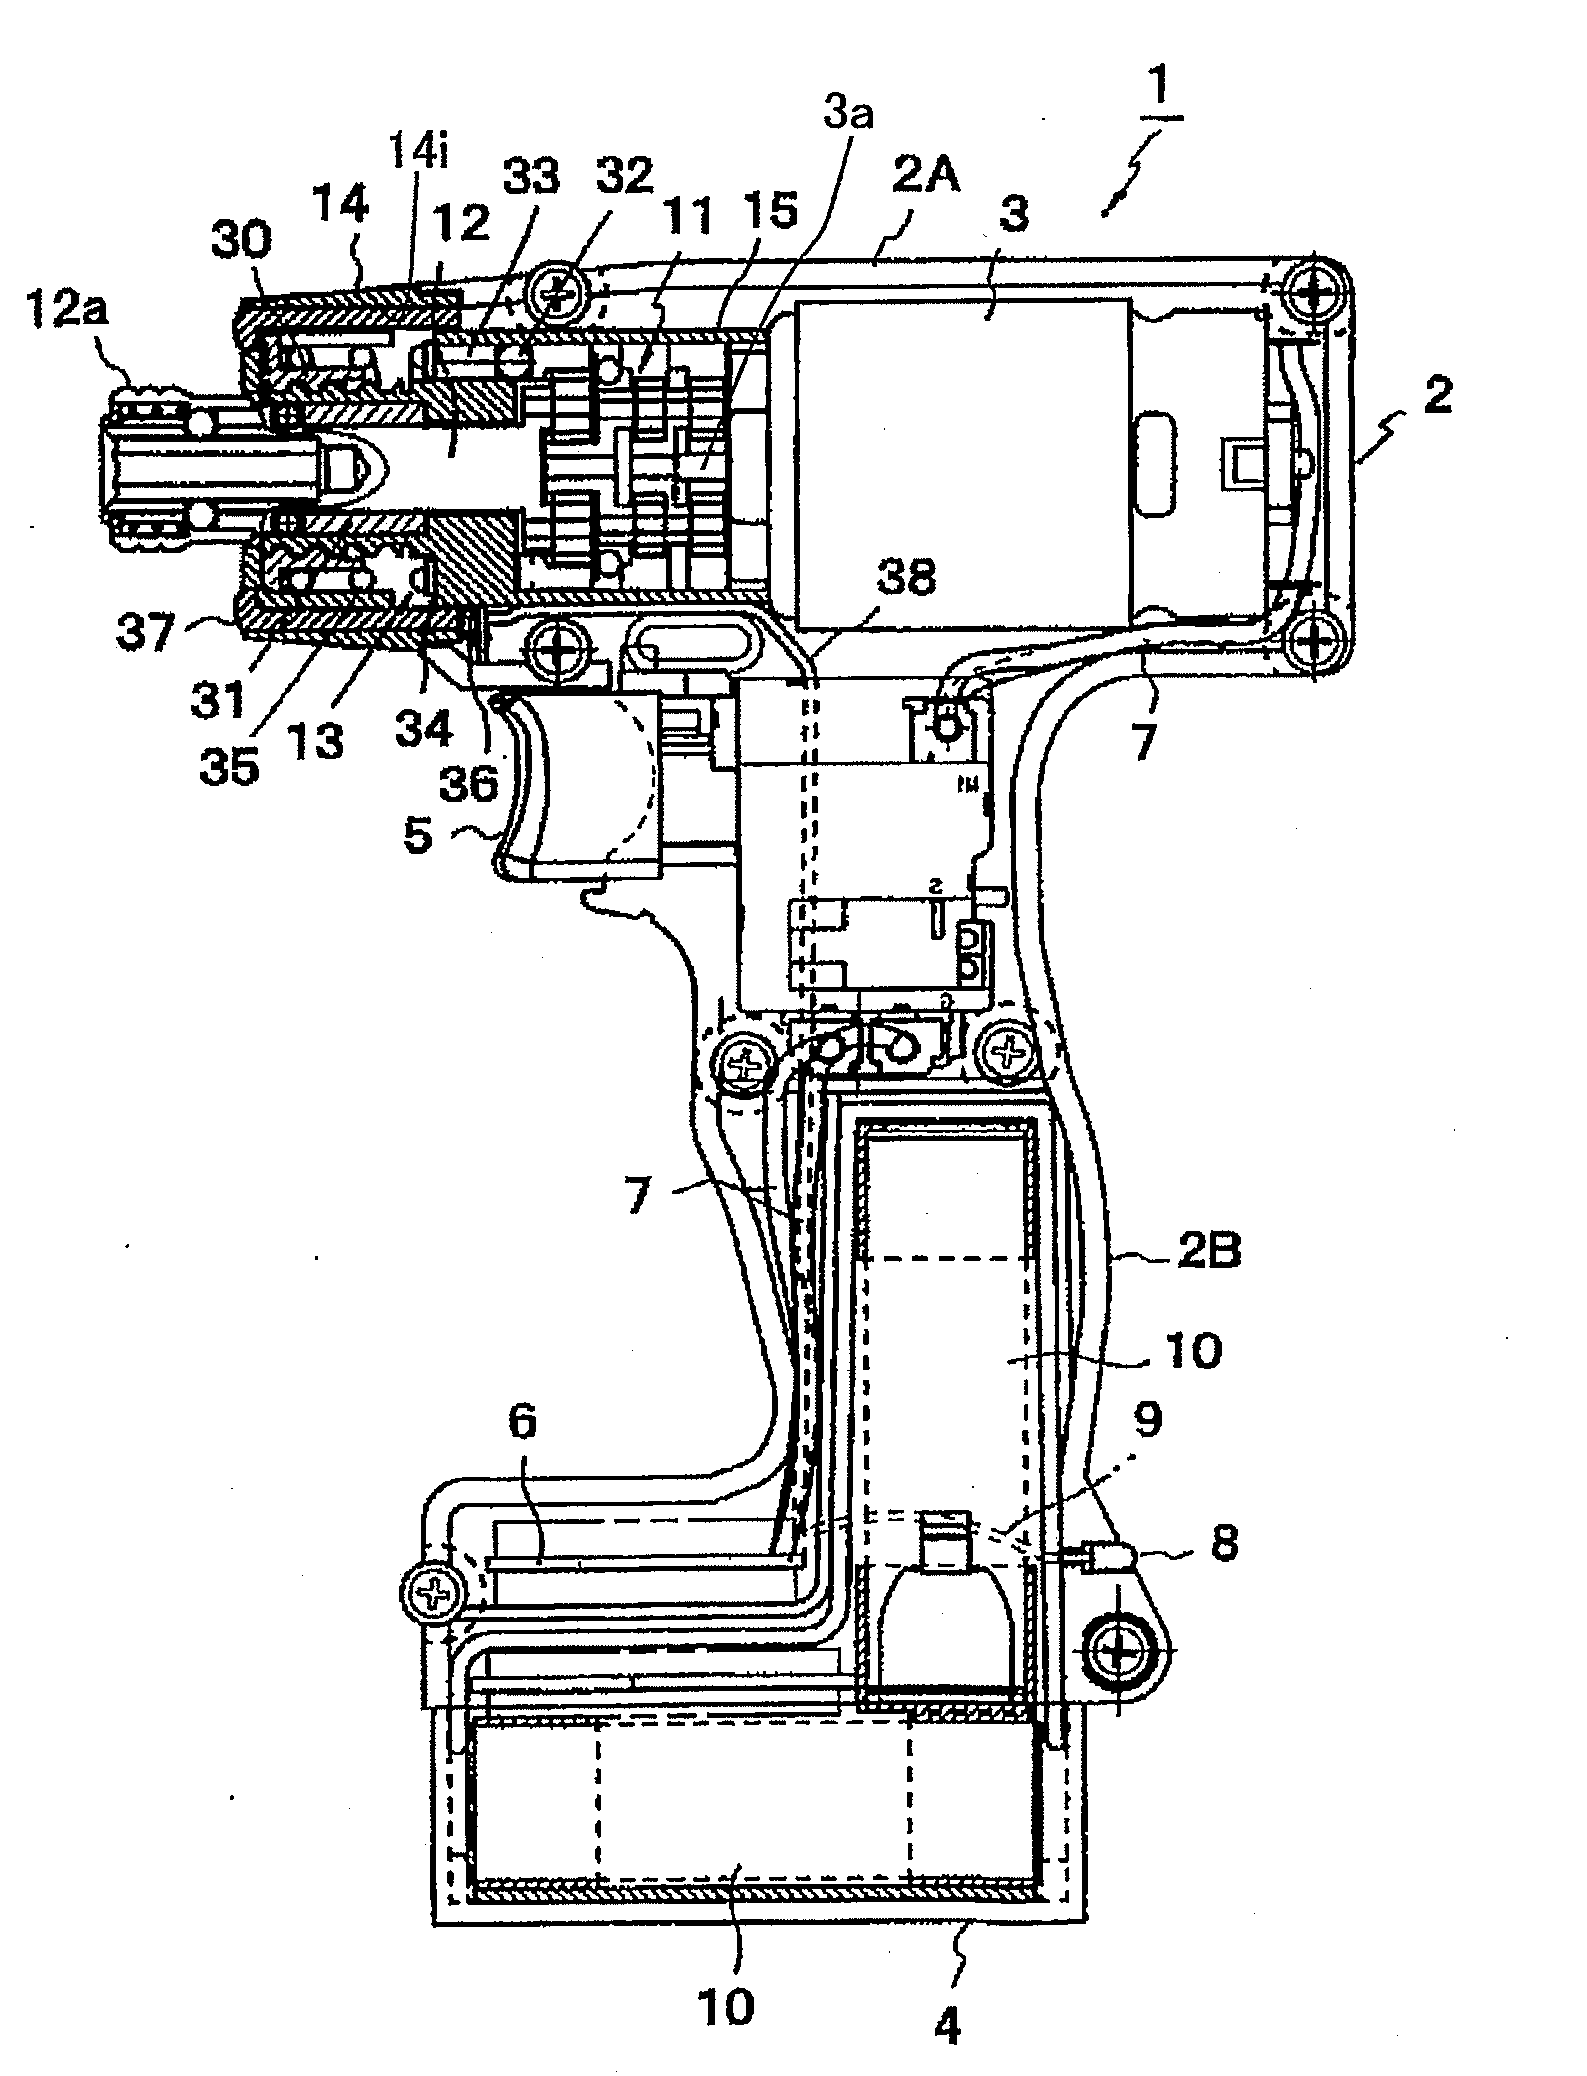 Electrical Power Tool